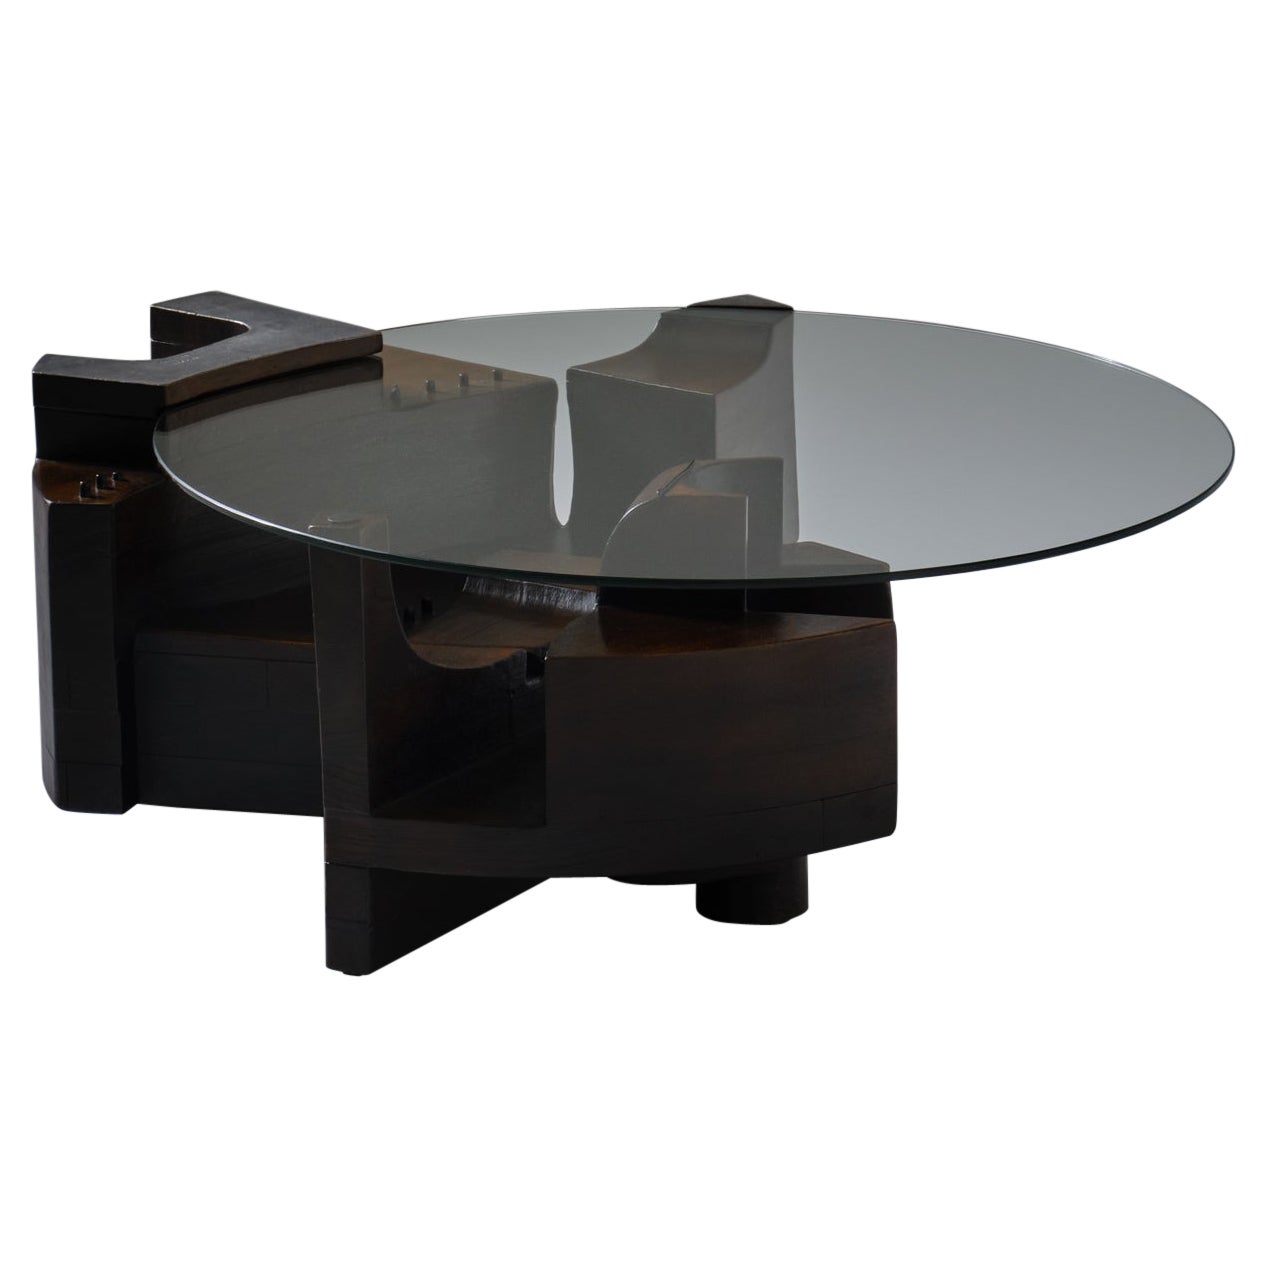 Nerone & Patuzzi Coffee Table for Gruppo NP2, Italy 1970s